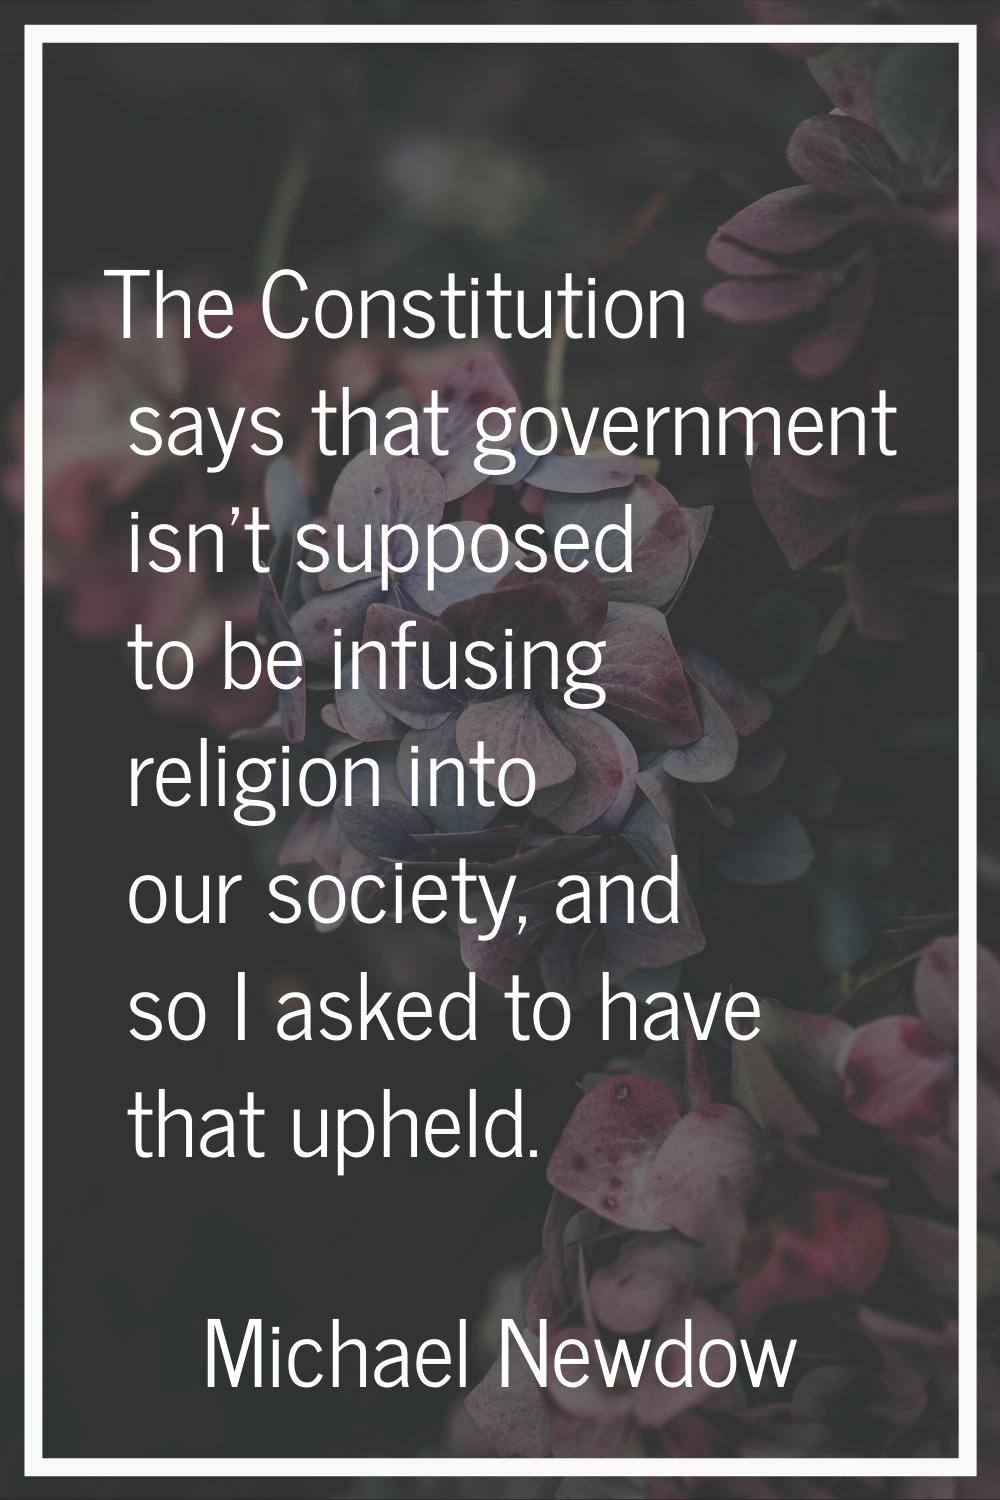 The Constitution says that government isn't supposed to be infusing religion into our society, and 